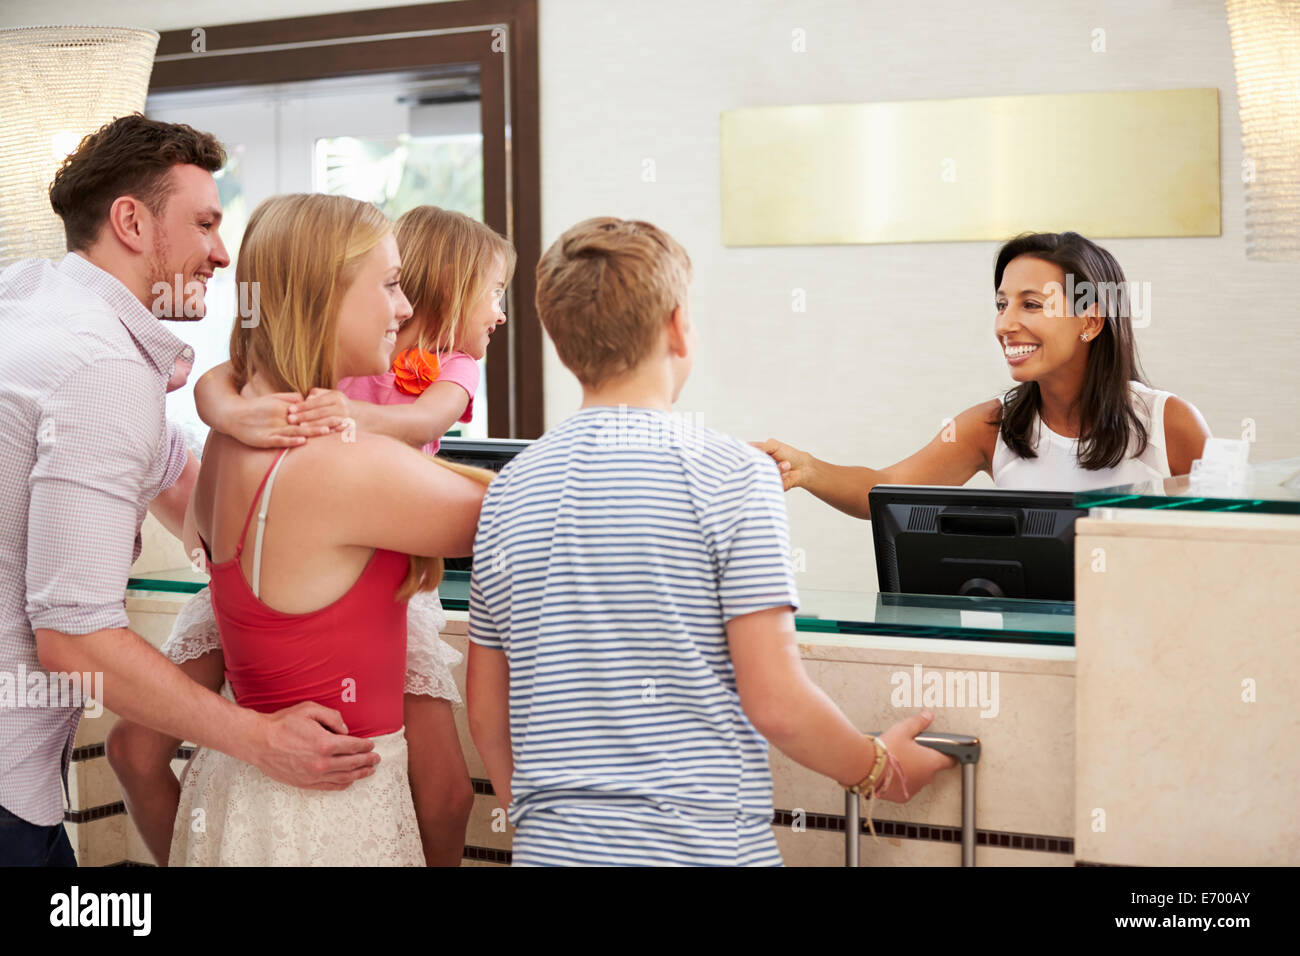 Family Checking In At Hotel Reception Stock Photo